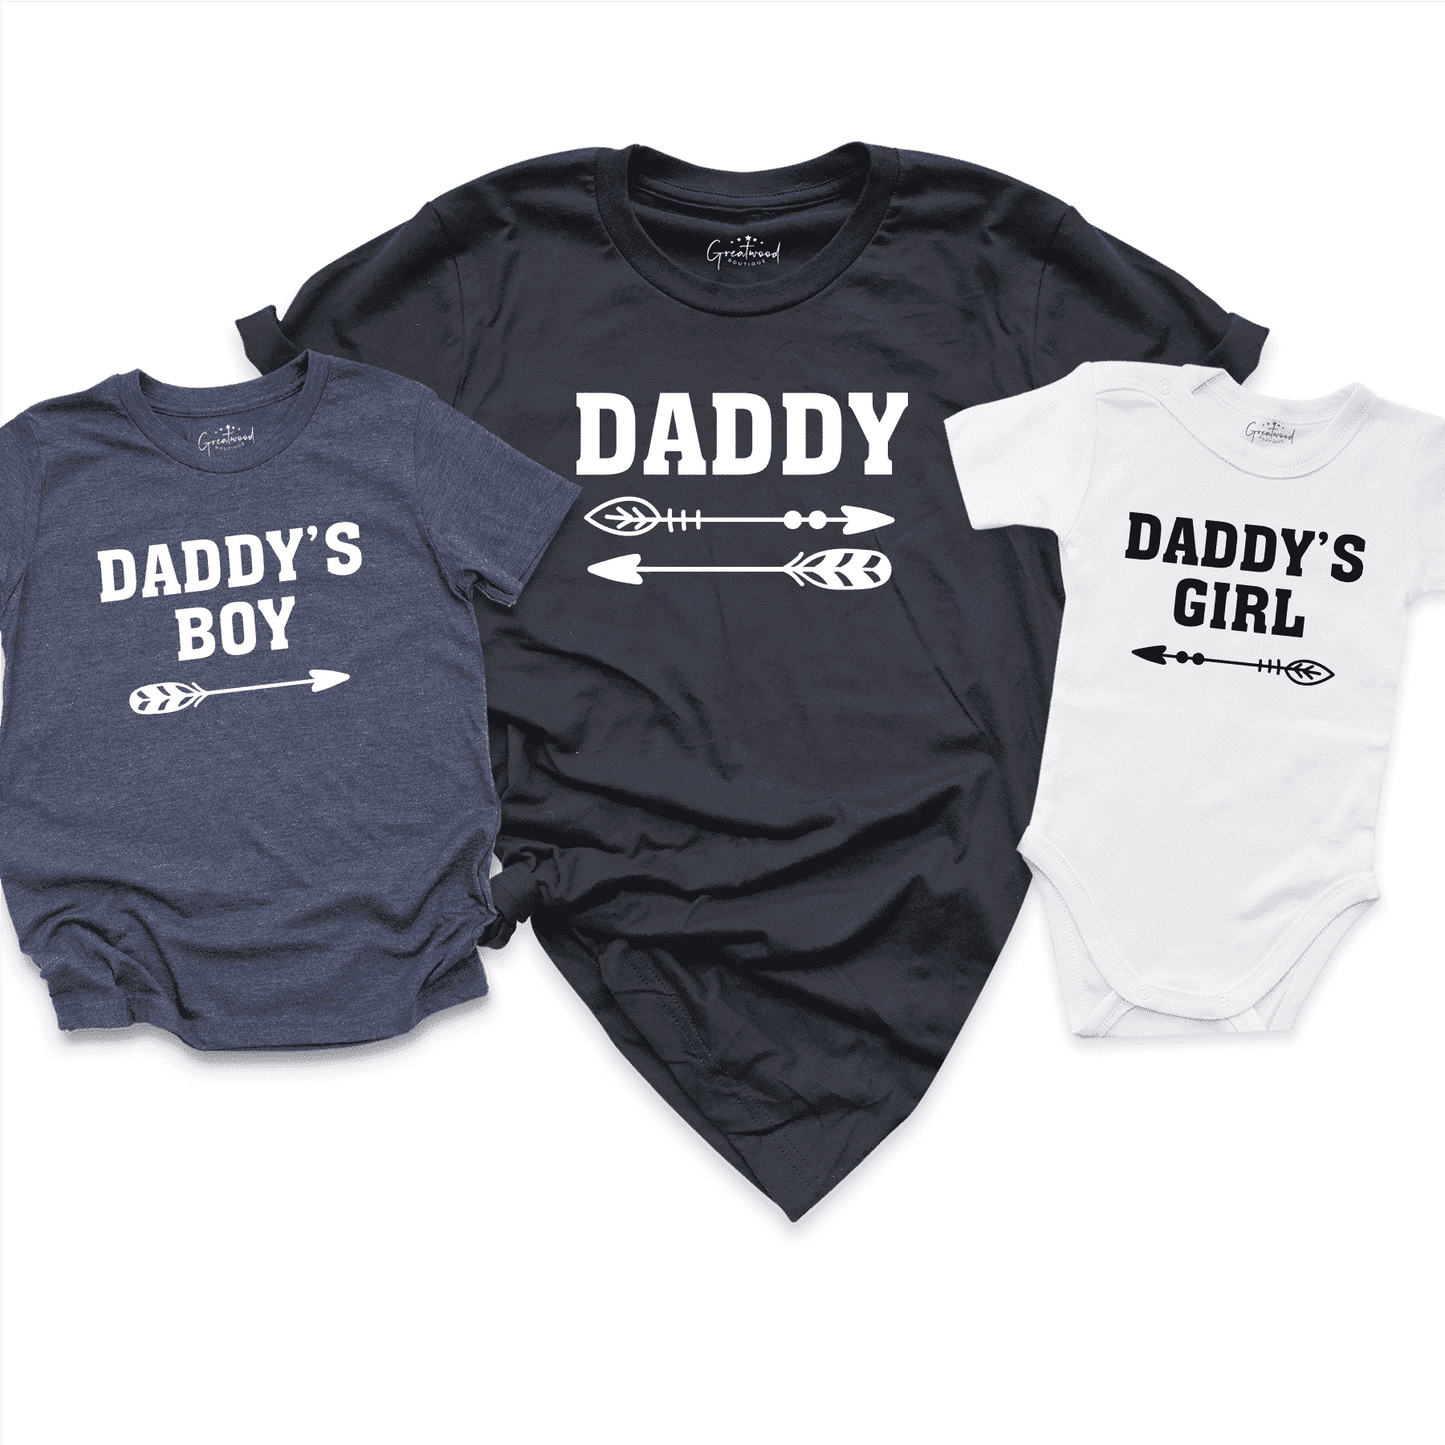 Daddy's Boy & Girl Shirt Black - Greatwood Boutique